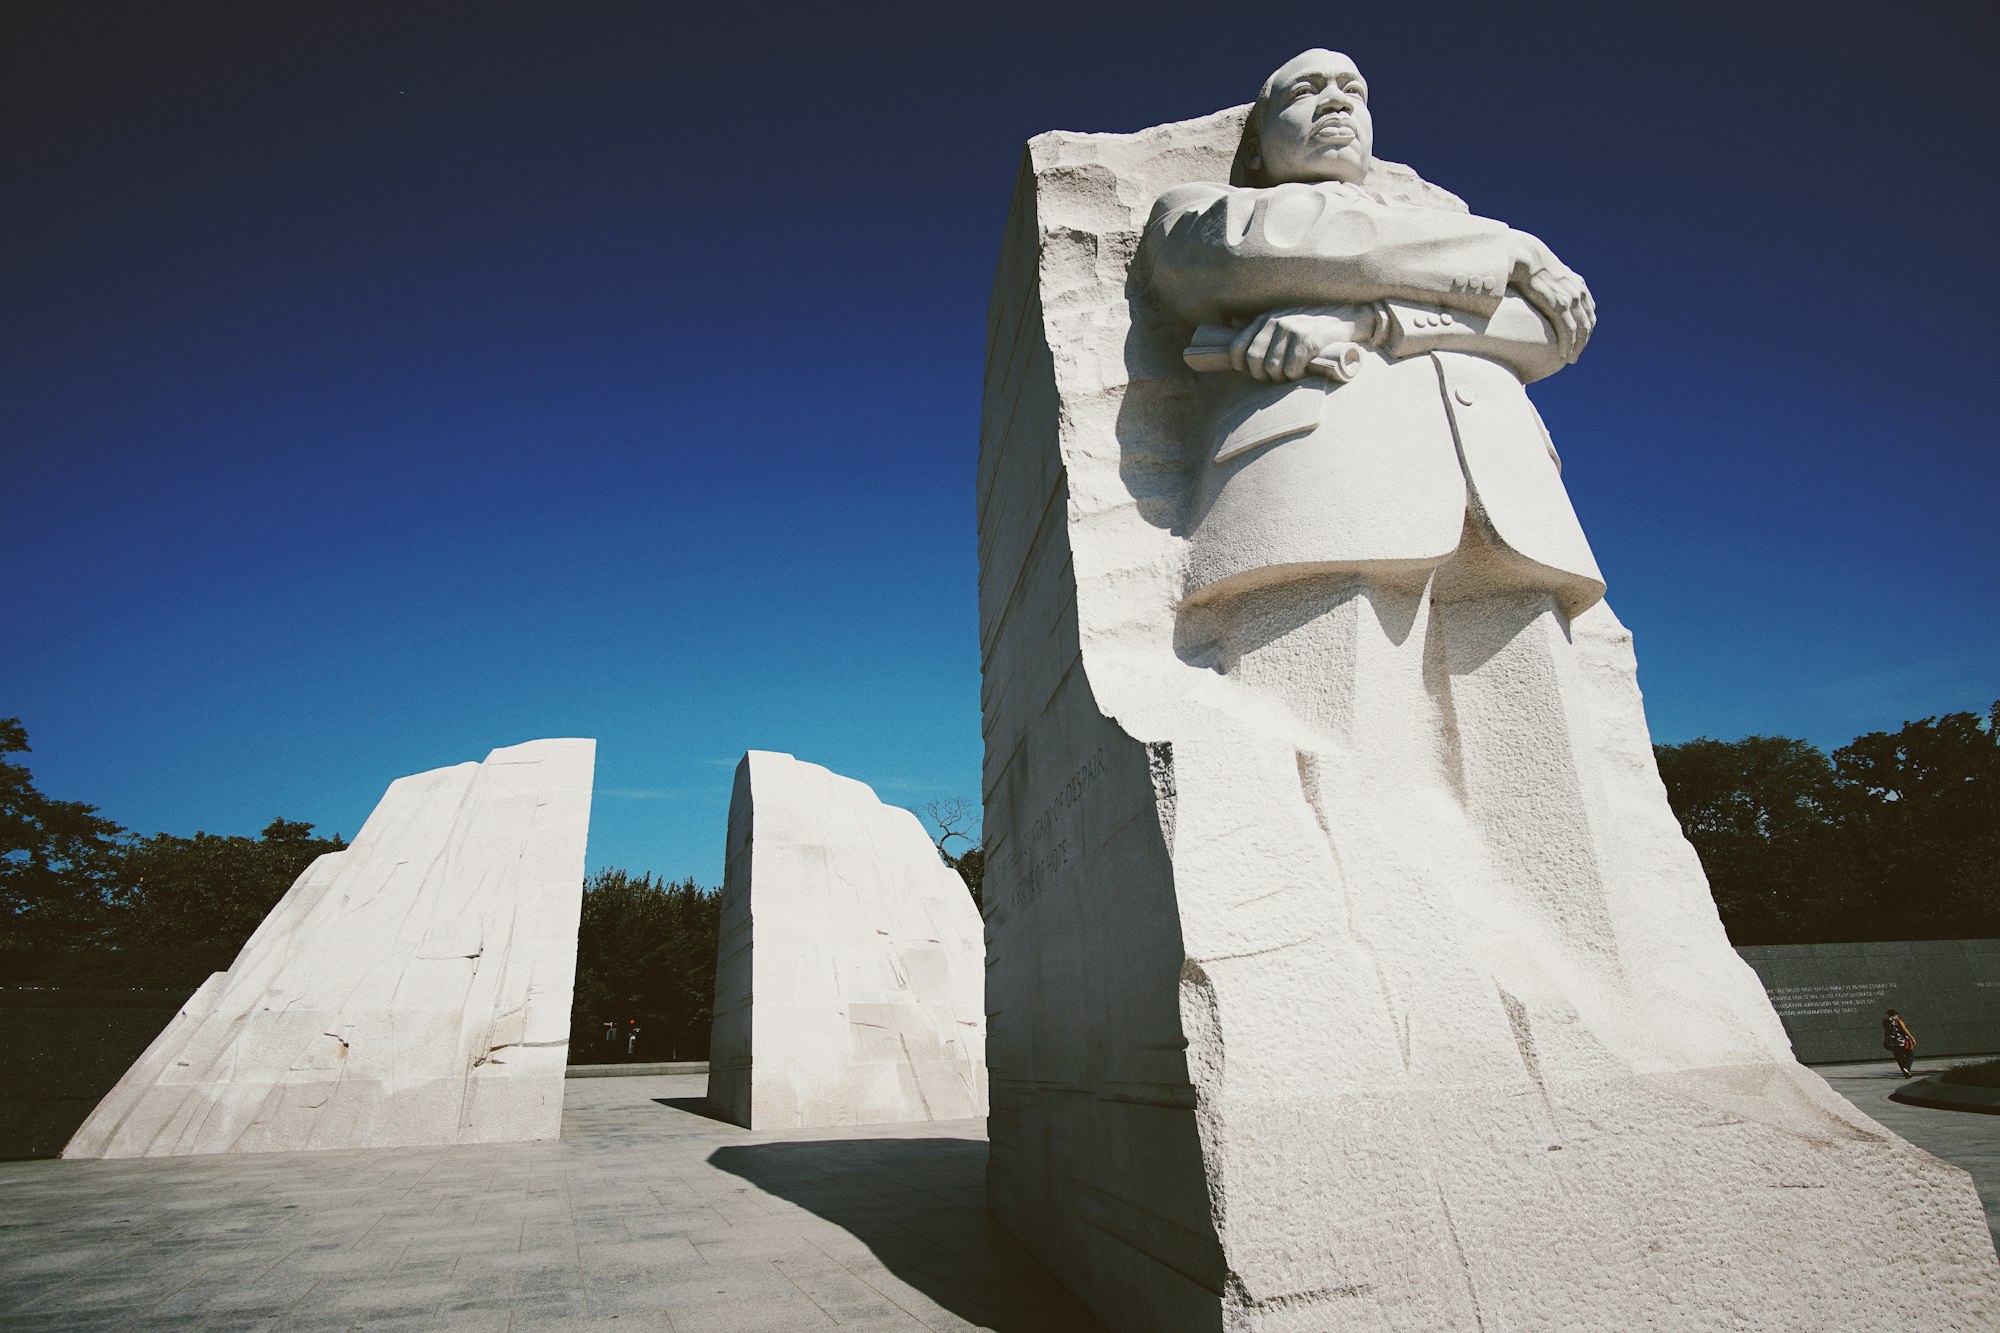 On Martin Luther King, Jr. Day (January 2021)